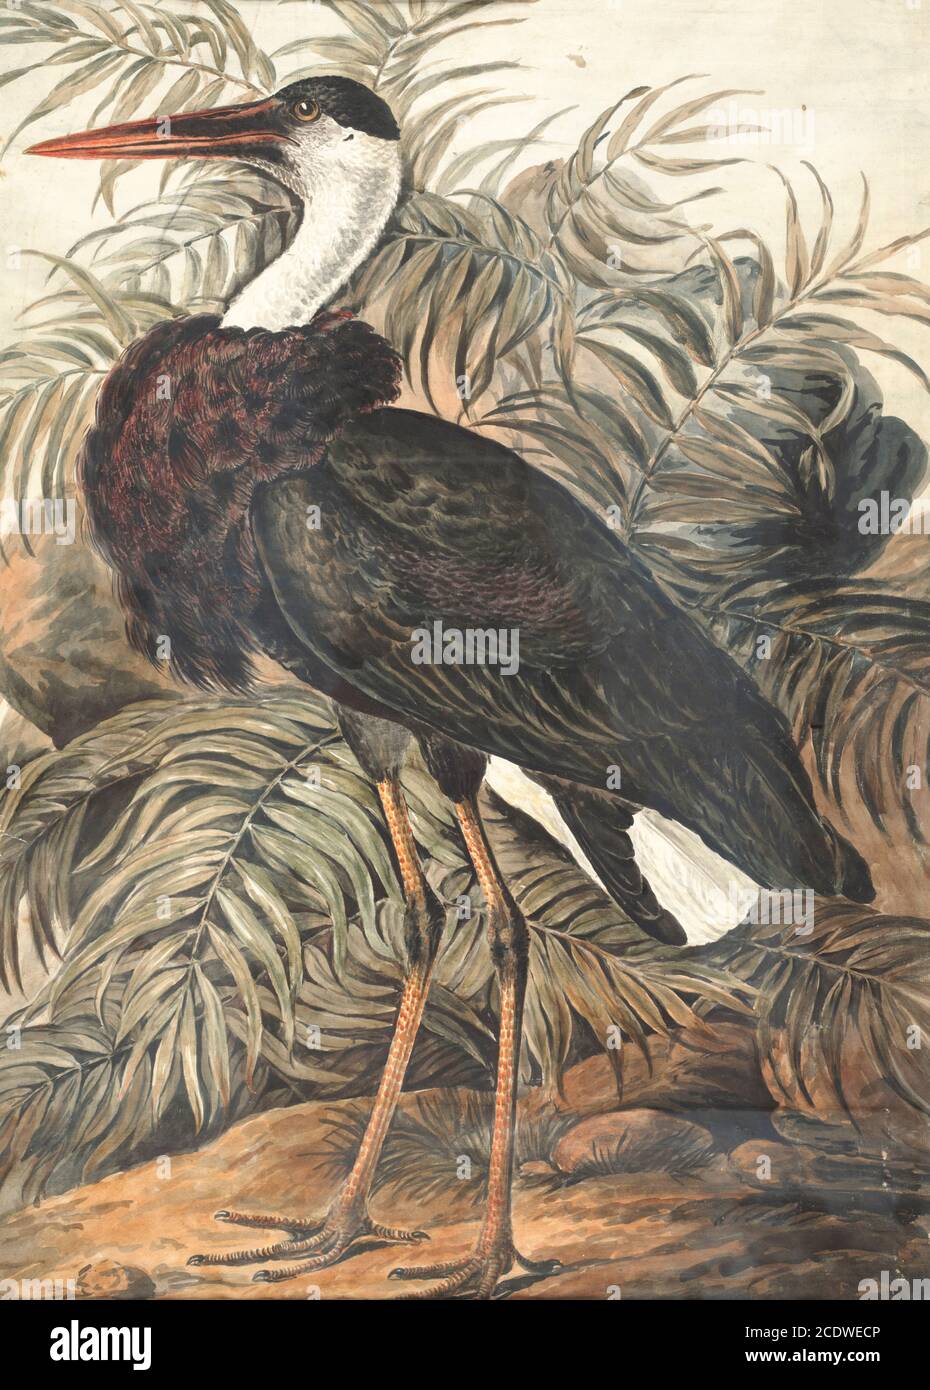 The woolly-necked stork or whitenecked stork (Ciconia episcopus) is a large wading bird in the stork family Ciconiidae. It breeds singly, or in small loose colonies. It is distributed in a wide variety of habitats including marshes in forests, agricultural areas, and freshwater wetlands. 18th century watercolor painting by Elizabeth Gwillim. Lady Elizabeth Symonds Gwillim (21 April 1763 – 21 December 1807) was an artist married to Sir Henry Gwillim, Puisne Judge at the Madras high court until 1808. Lady Gwillim painted a series of about 200 watercolours of Indian birds. Produced about 20 years Stock Photo